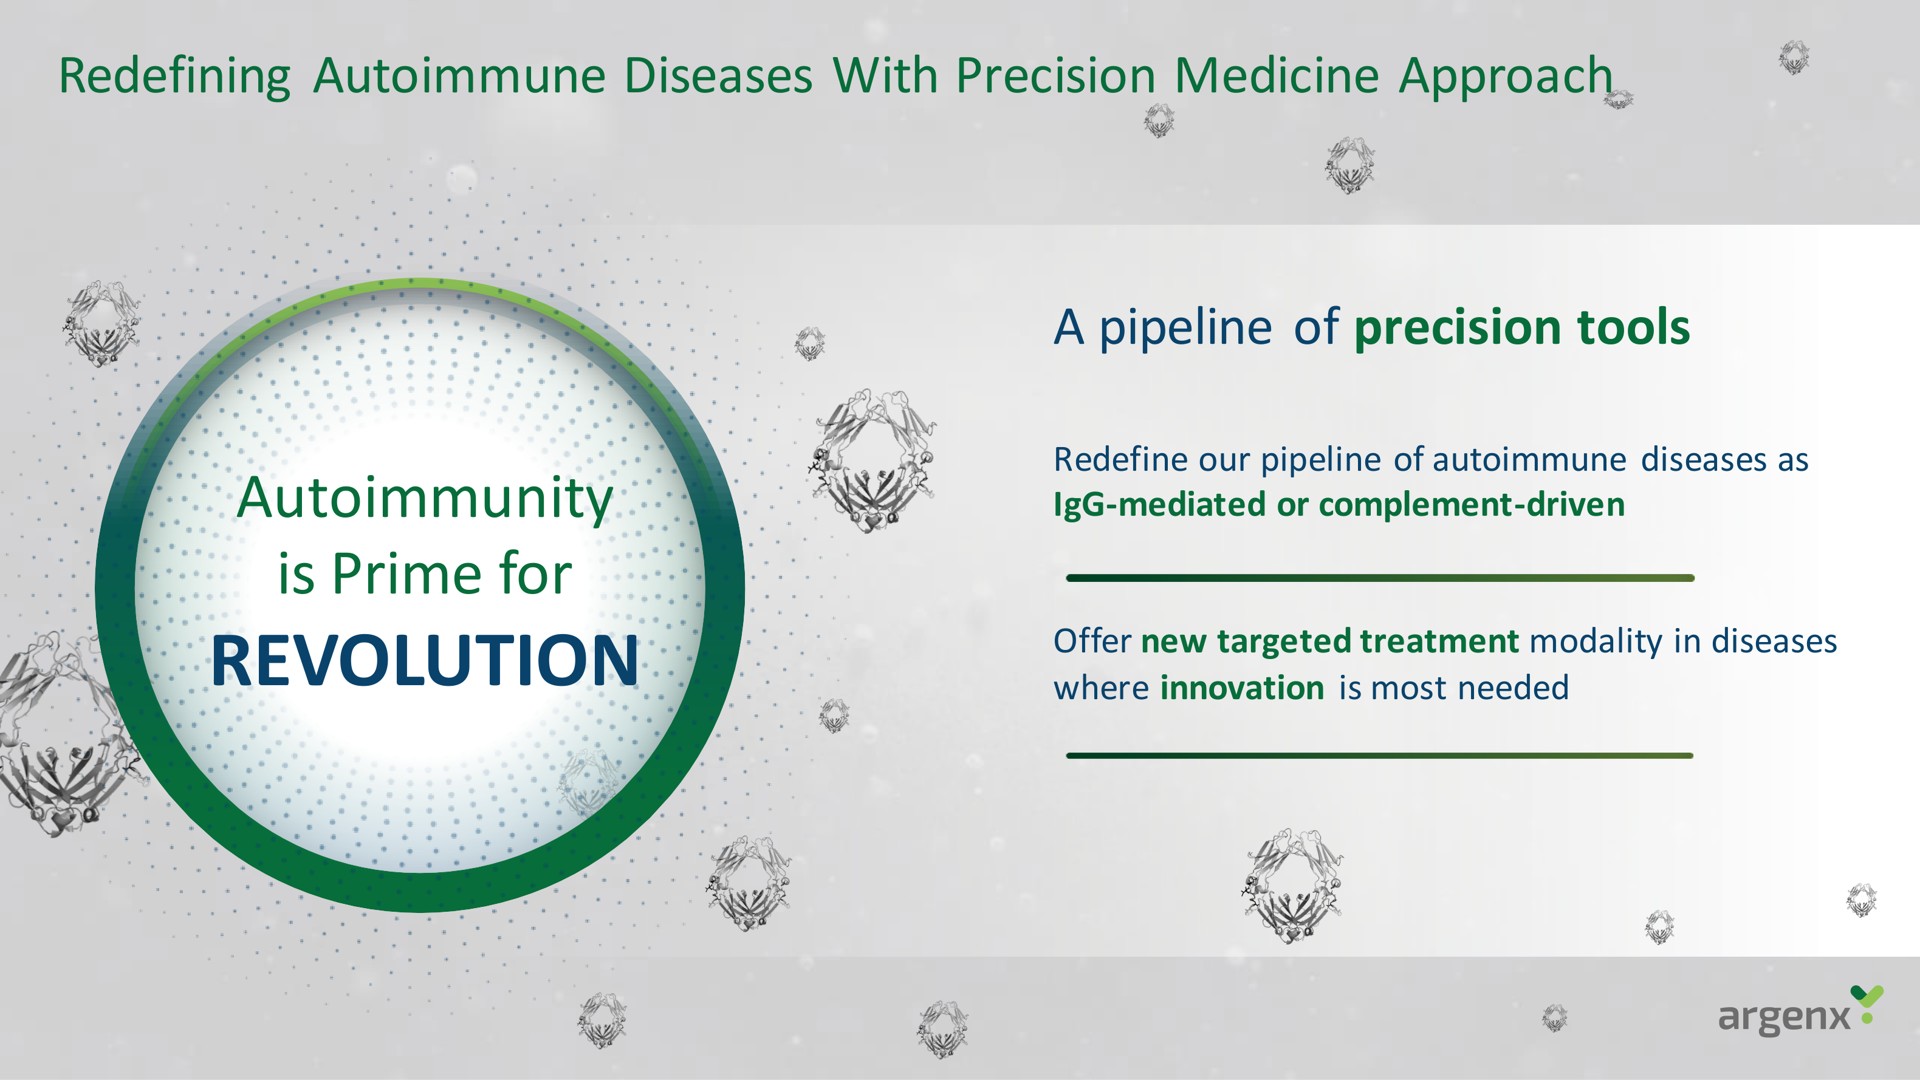 redefining diseases with precision medicine approach autoimmunity is prime for revolution a pipeline of precision tools a | argenx SE